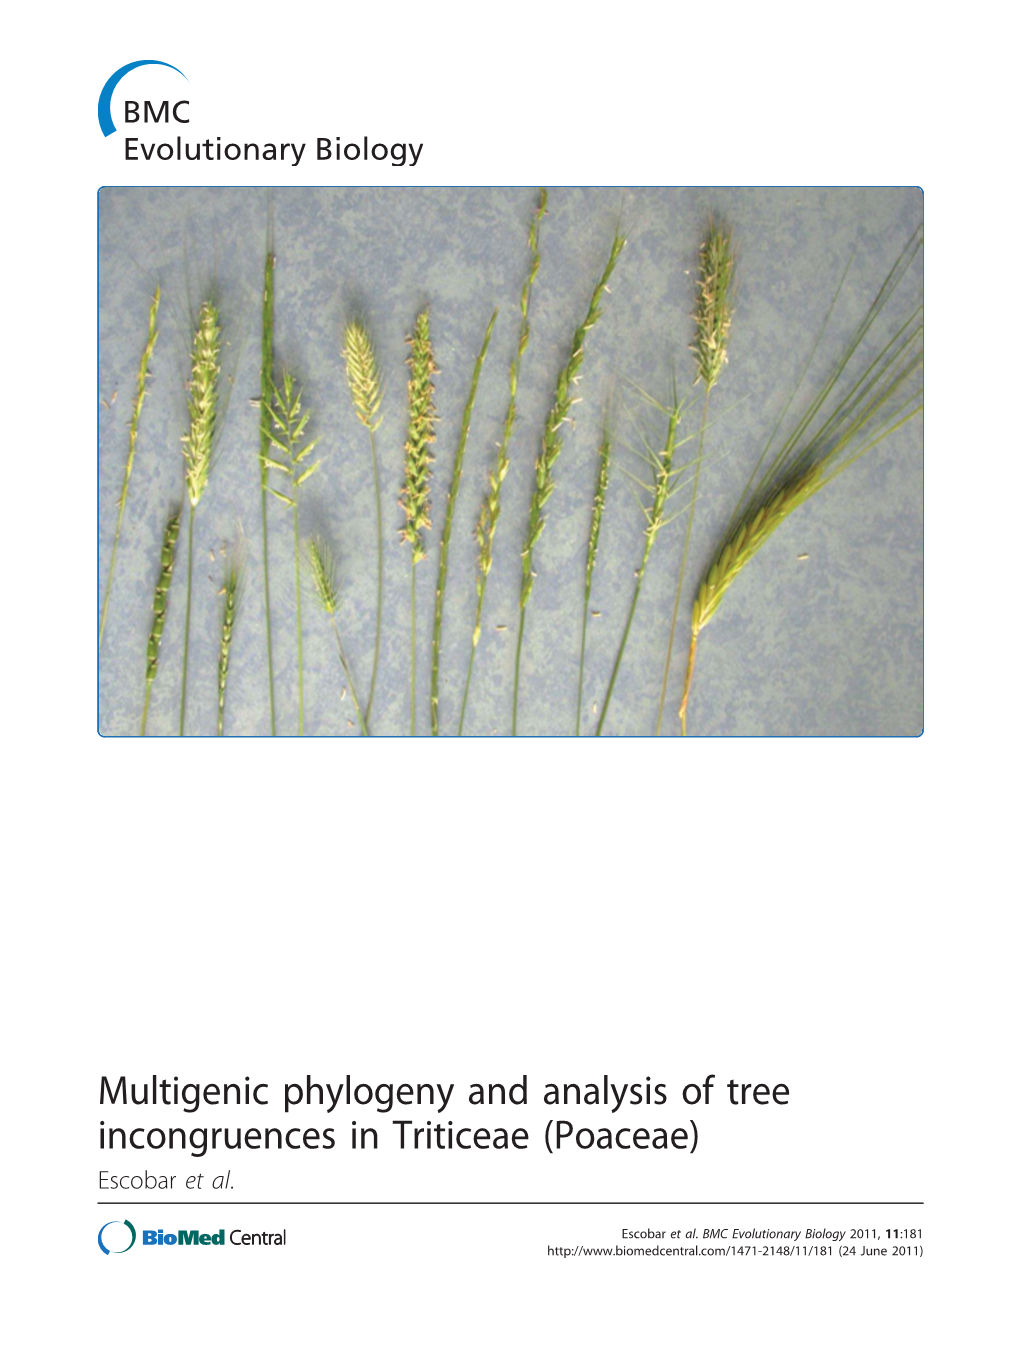 Multigenic Phylogeny and Analysis of Tree Incongruences in Triticeae (Poaceae) Escobar Et Al